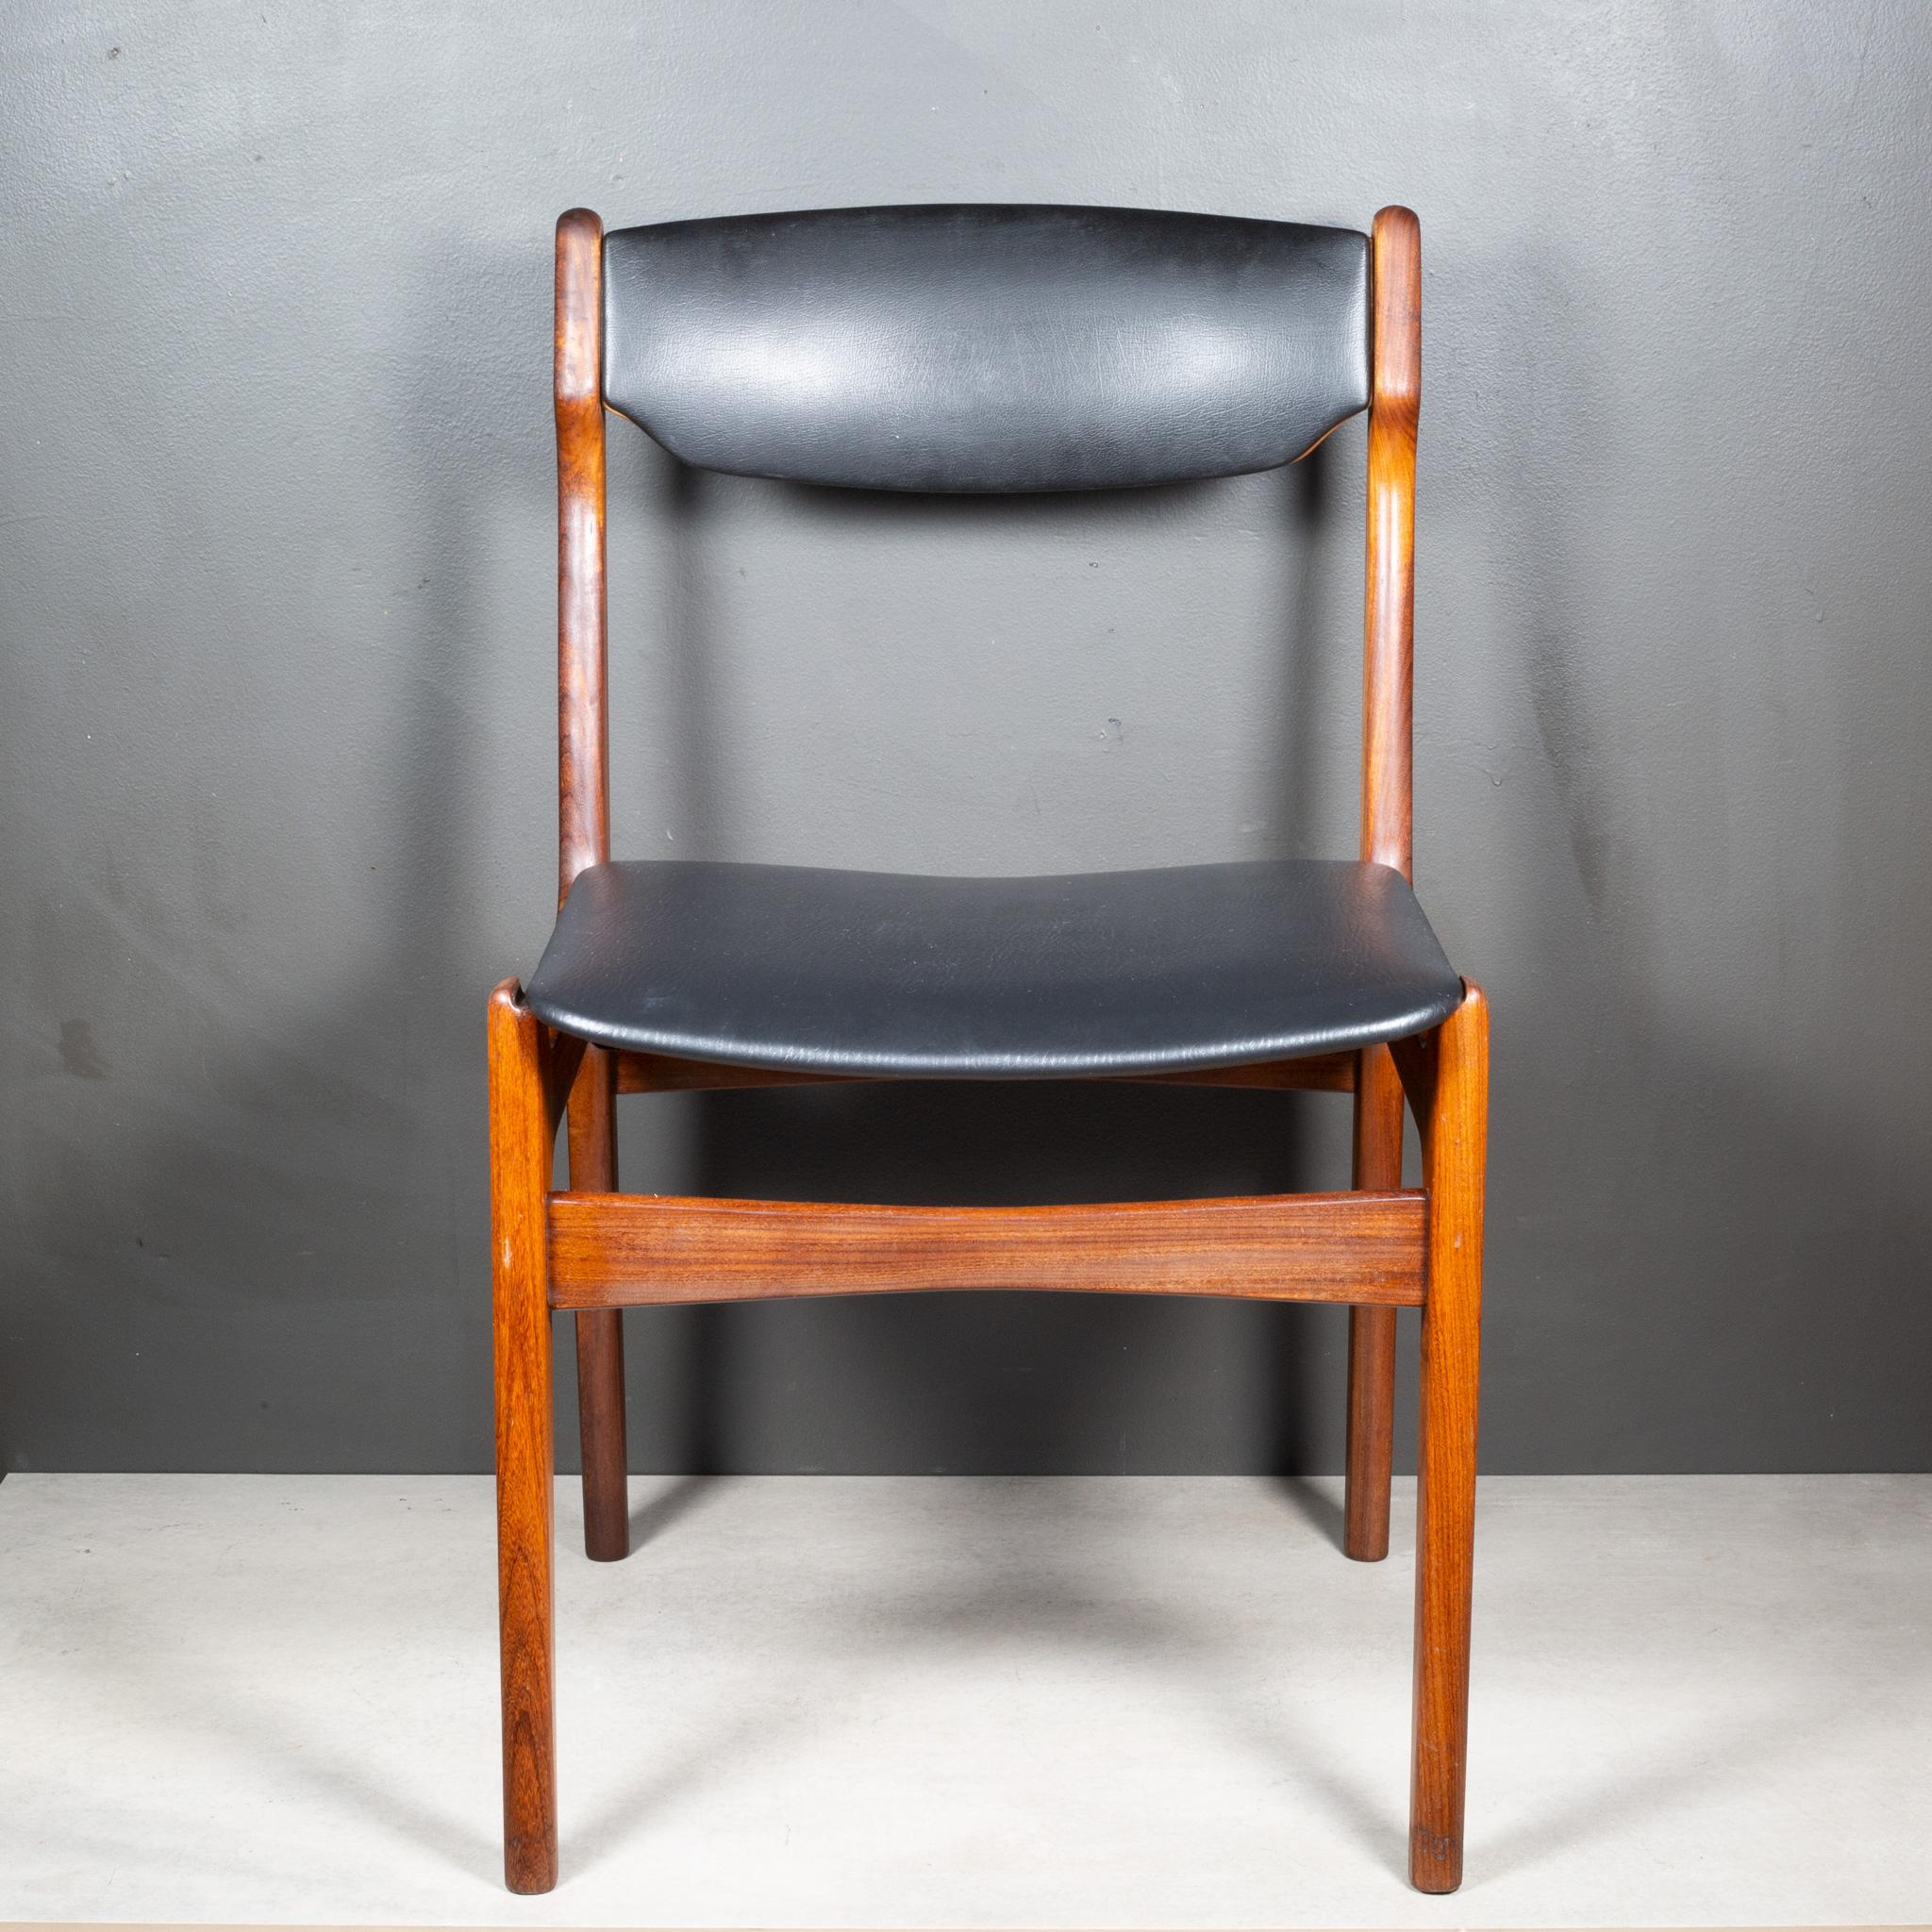  Mid-century Reupholsted Teak Dining Chairs c.1960 For Sale 8